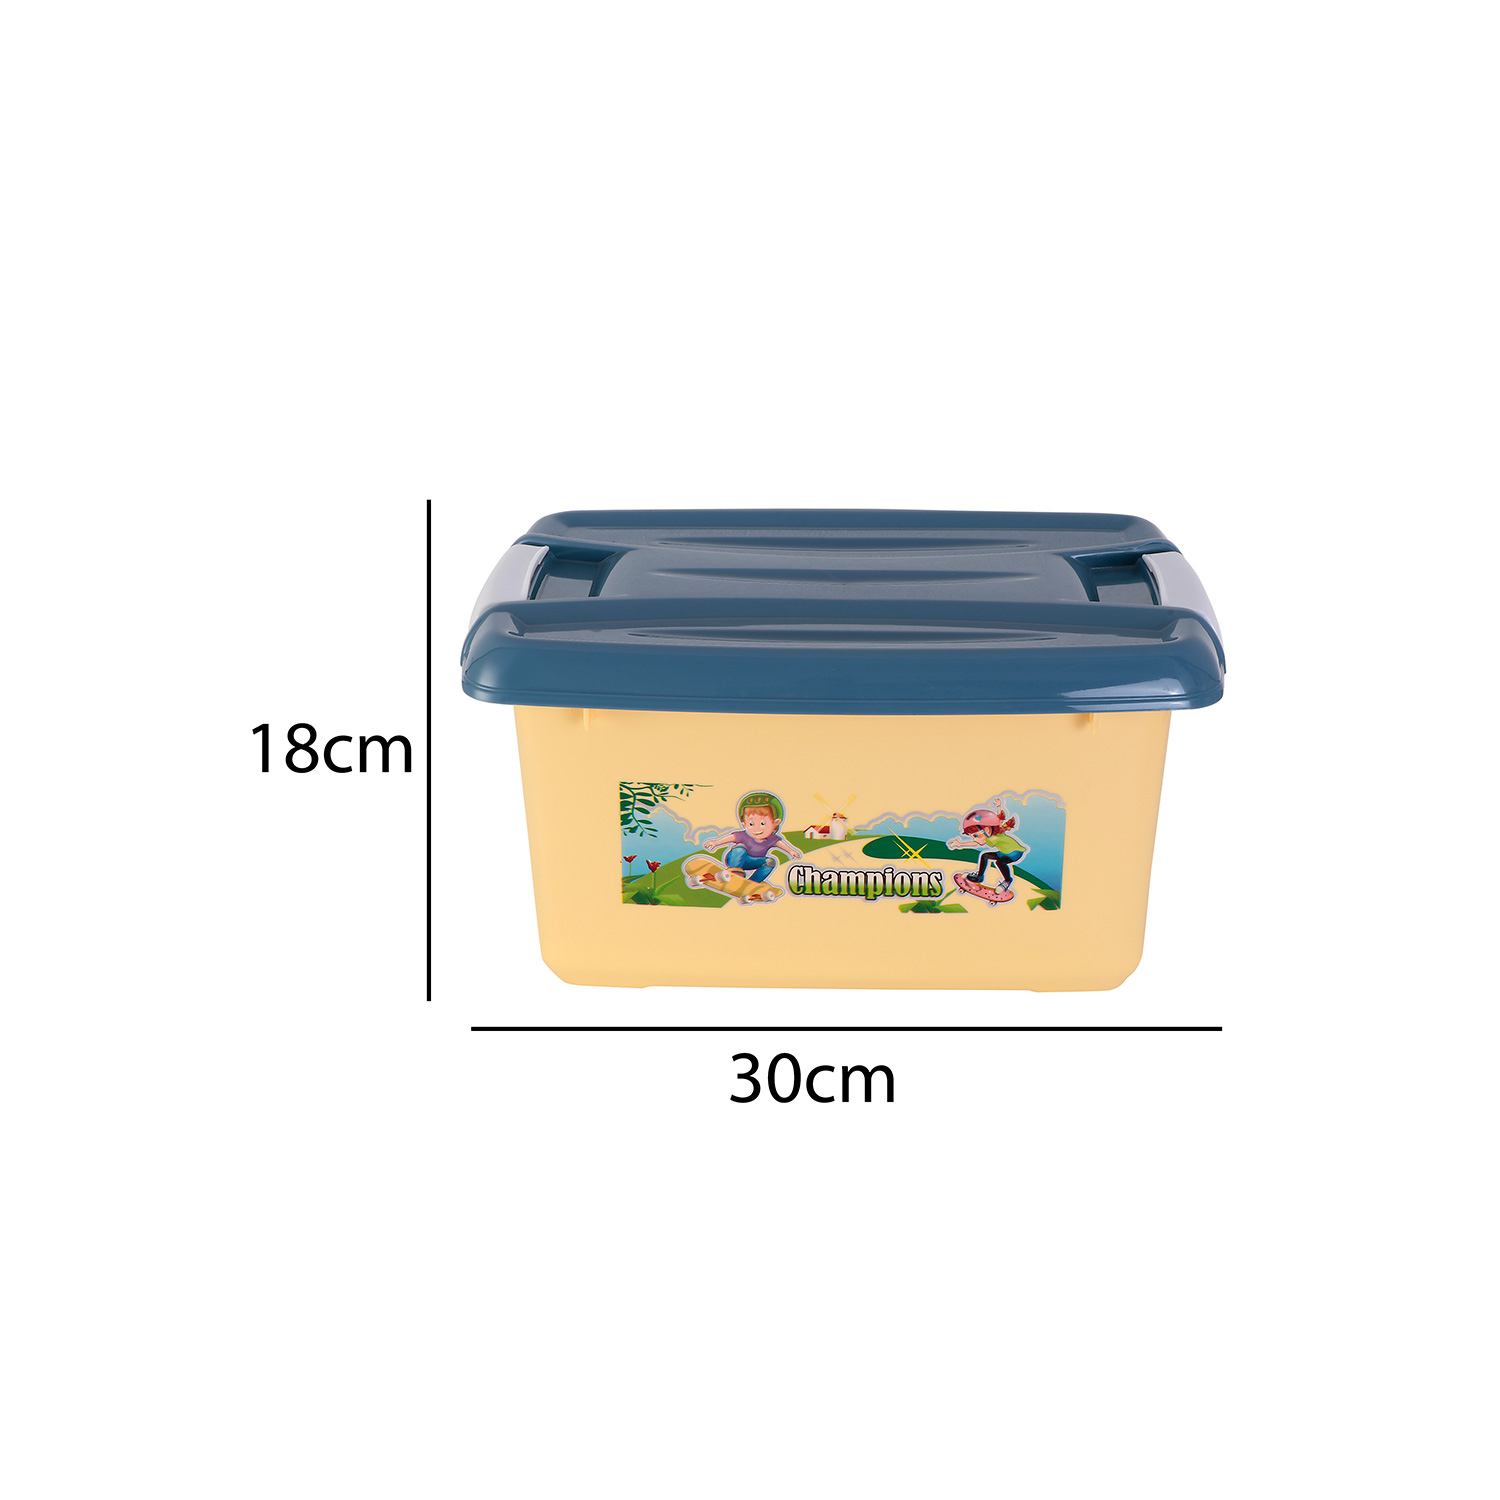 Sukhson India Plastic BPA Free Multipurposes with Lid Storage Basket (Pack of 2) | Yellow